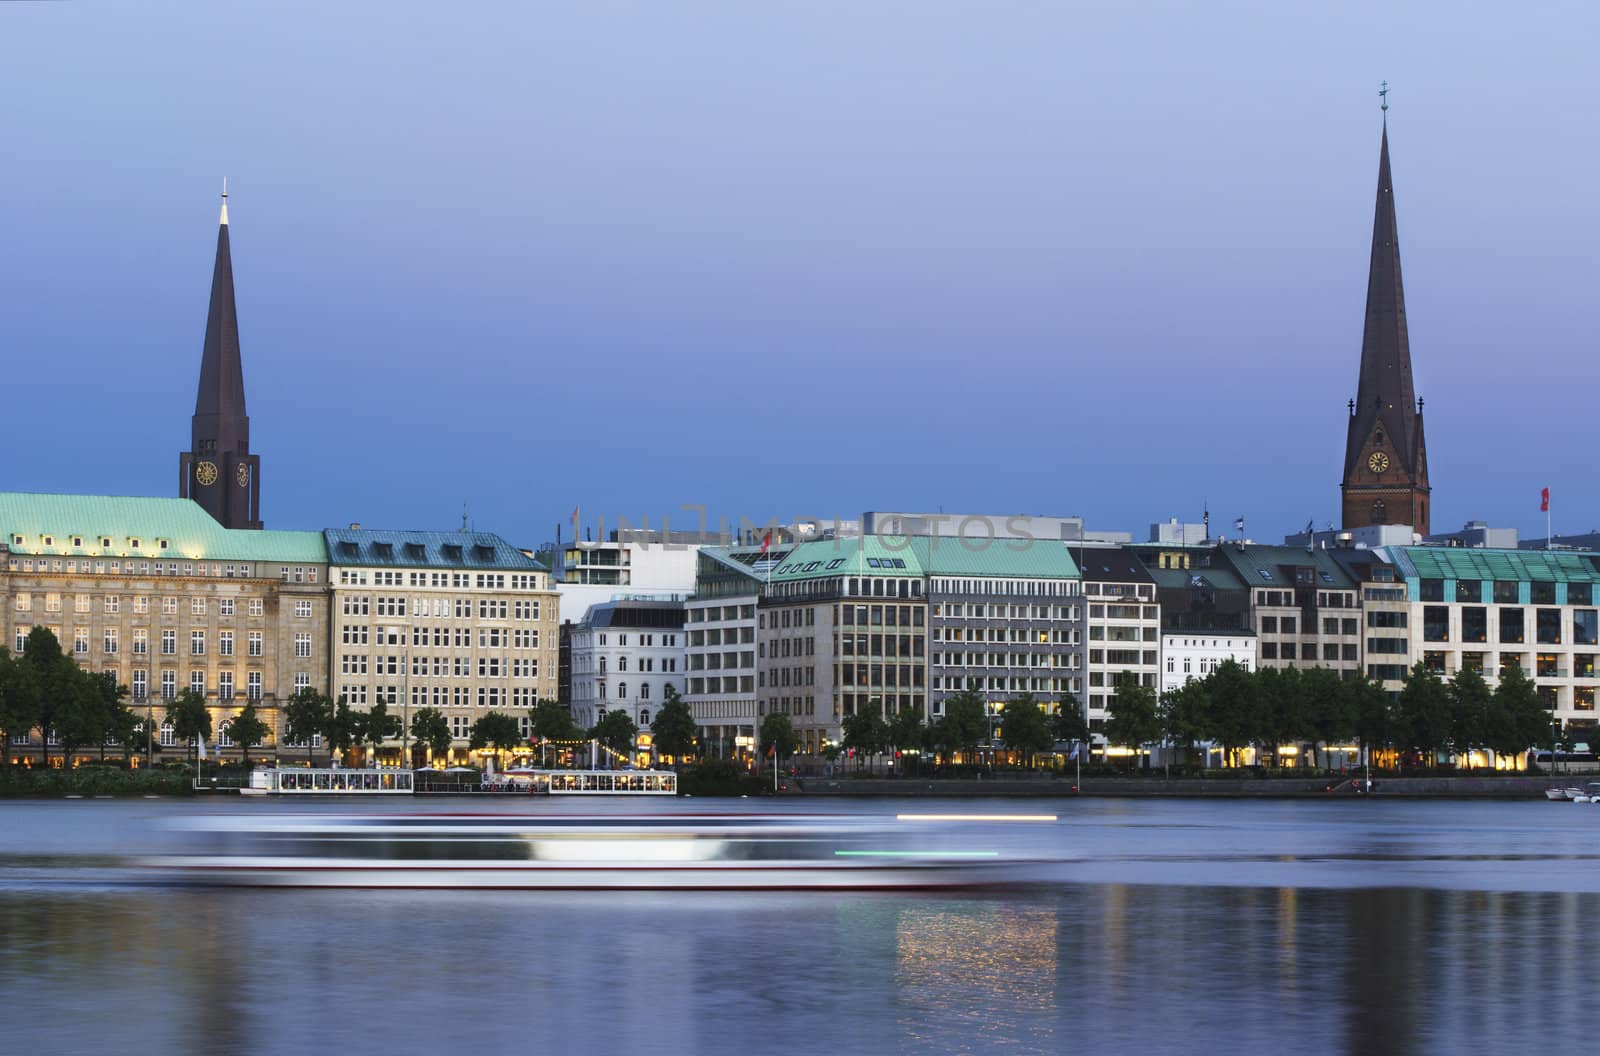 Long exposure evening shot of the Binnenalster in Hamburg. A ferry is blurred by its motion.